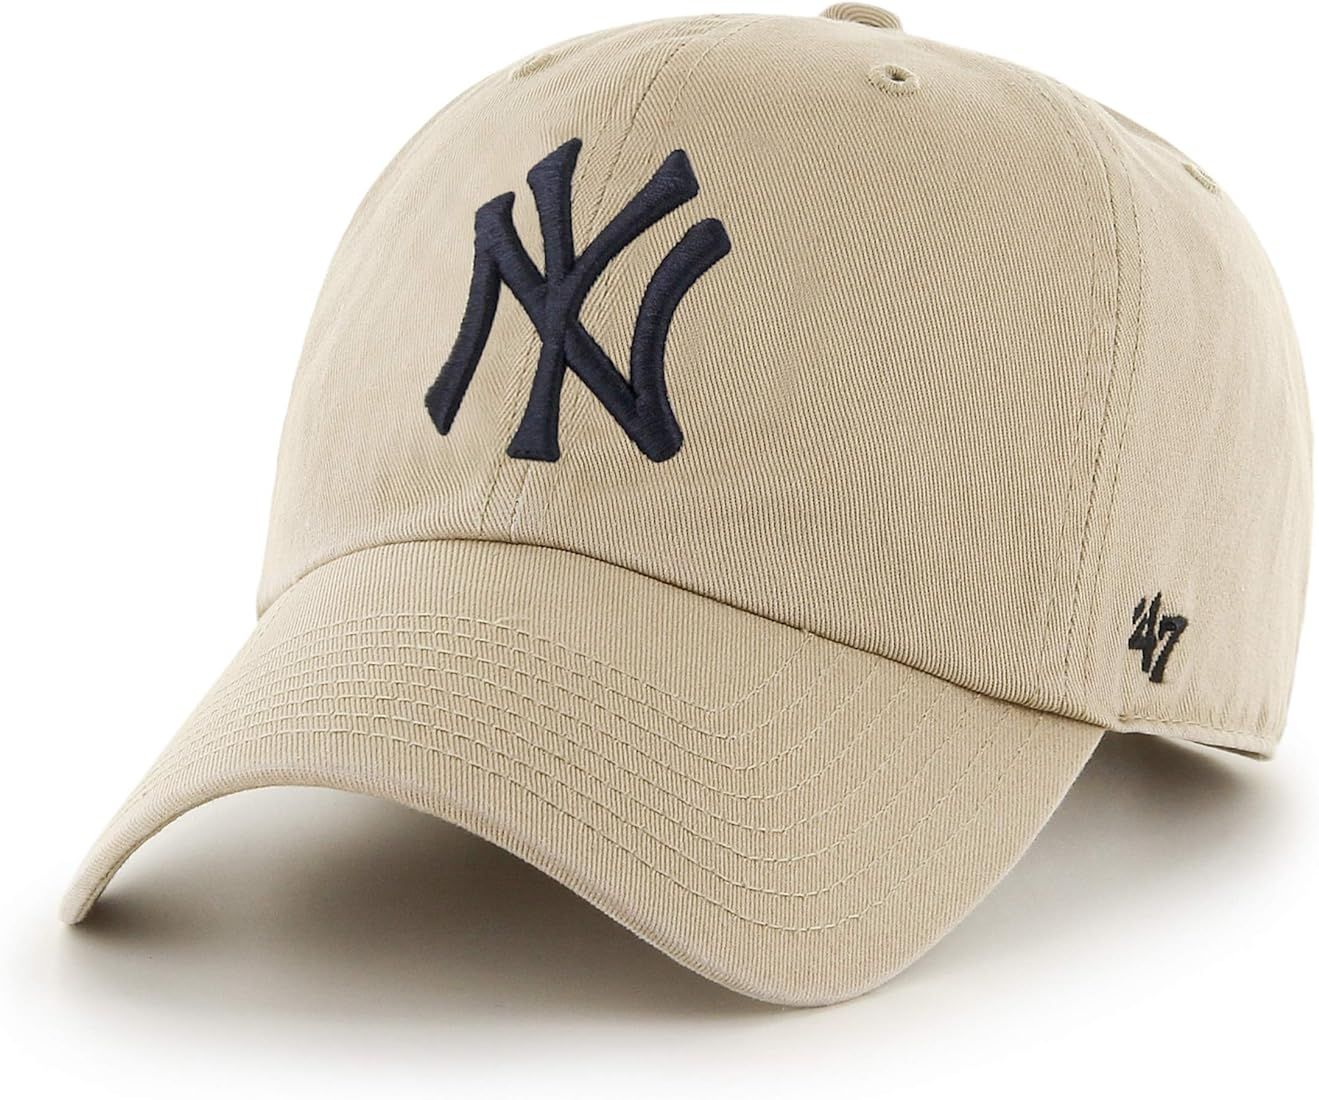 MLB Natural Clean Up Adjustable Hat Cap, Adult One Size | Amazon (US)